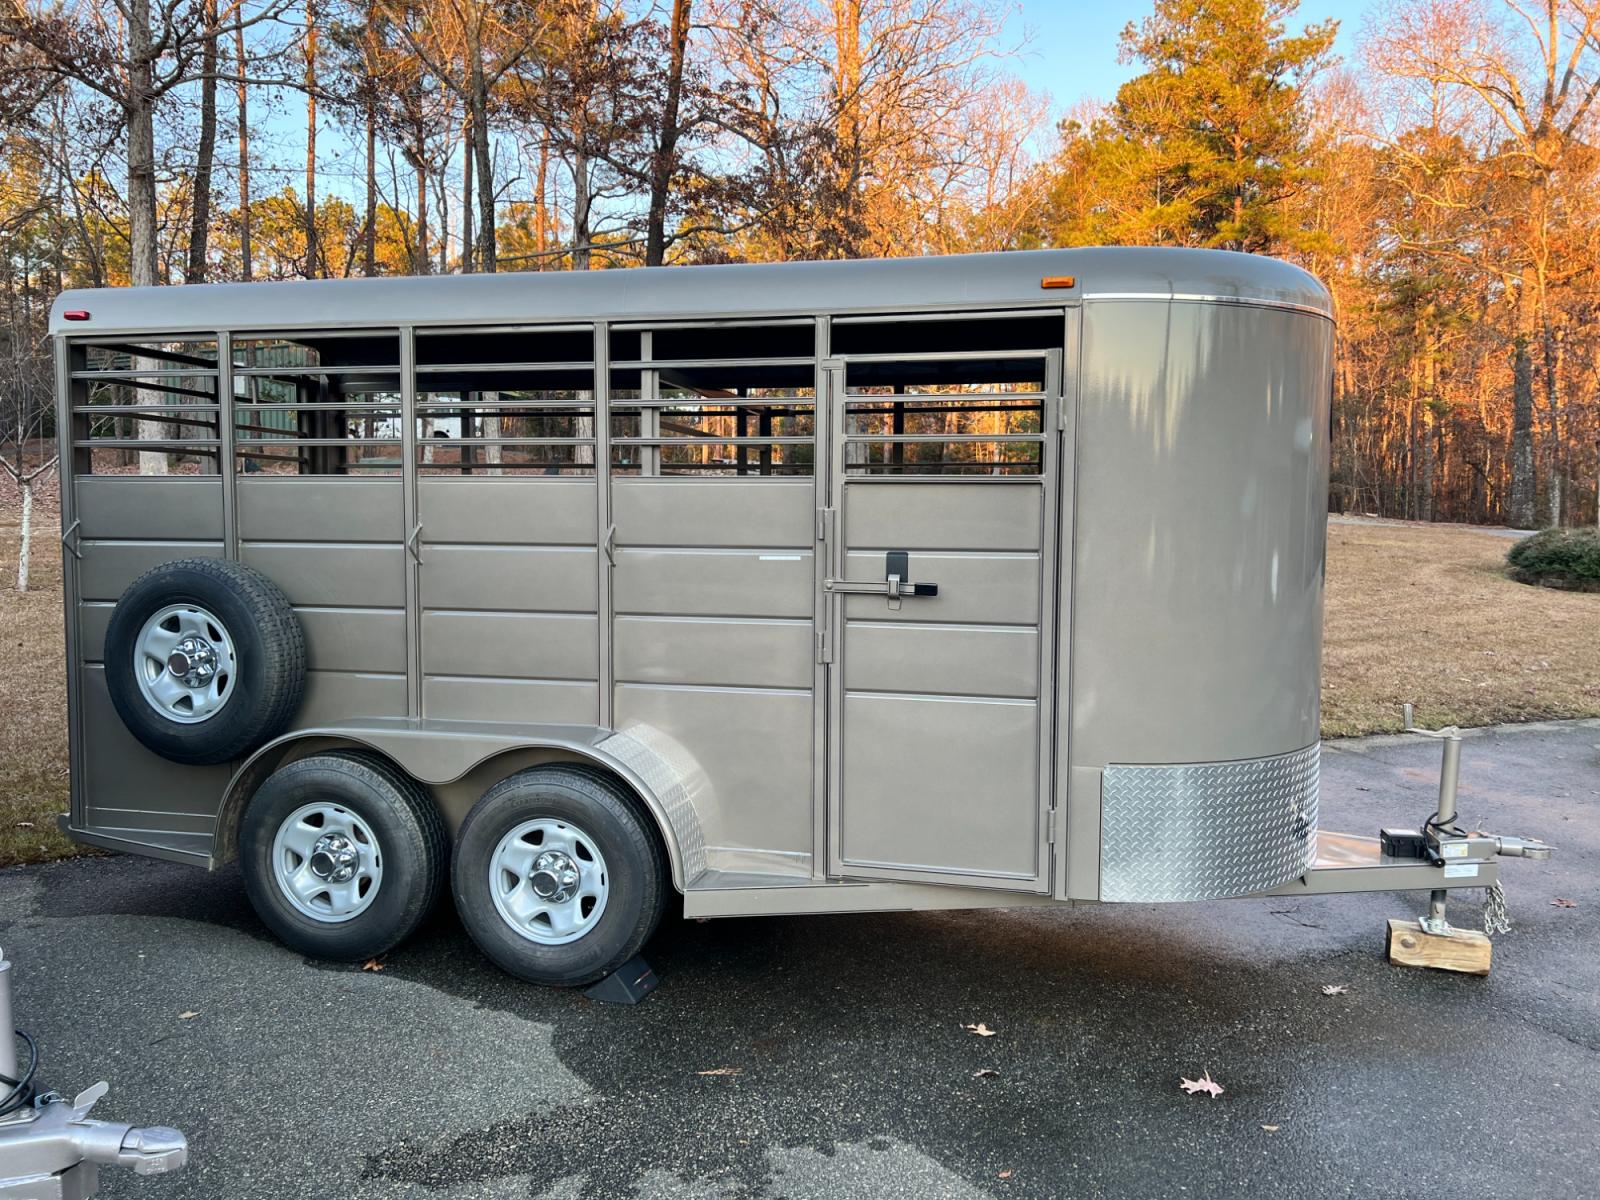 2023 Calico 6ft X 16ft Livestock & 7ft Tall , located at 1330 Rainey Rd., Macon, 31220, (478) 960-1044, 32.845638, -83.778687 - Brand New 2023 Horse & Livestock Trailer 7ft Tall Built November 30th 2022, Made by Calico Trailers, in Arkansas Haul Up to 4 Horses in Style, or Multiple Cows or Goats!! Thick Heavy Duty Rubber Floor Mats Included too! 7ft Tall Interior Height for Hauling Horses, Cows, Goats, Pigs, Sheep, What - Photo #1